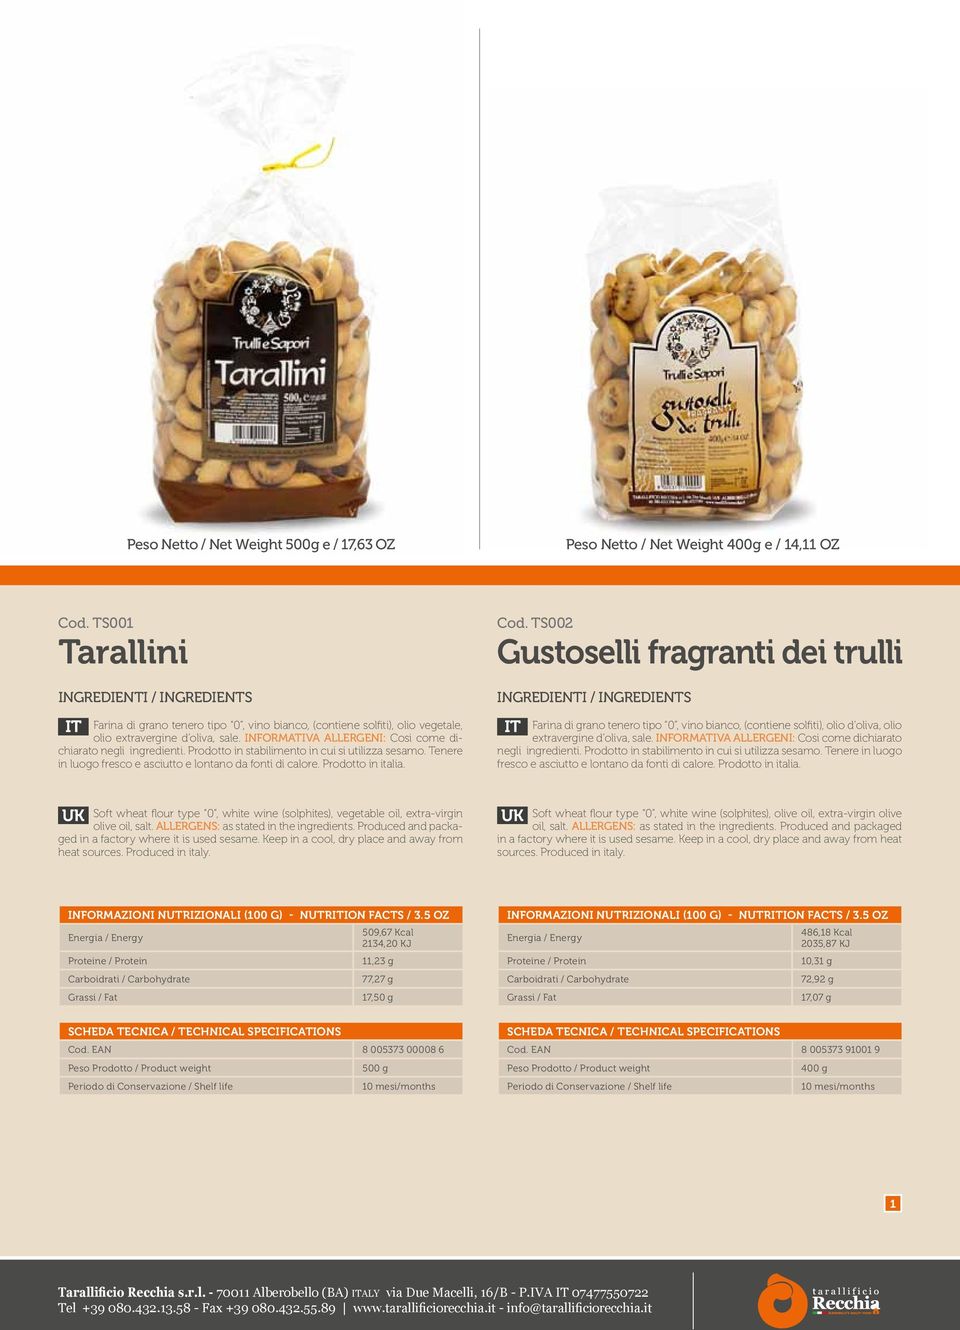 ALLERGENS: as stated in the ingredients. Produced and packaged in a factory where it is used sesame. Keep in a cool, dry place and away from heat sources. Produced in italy. oil, salt.